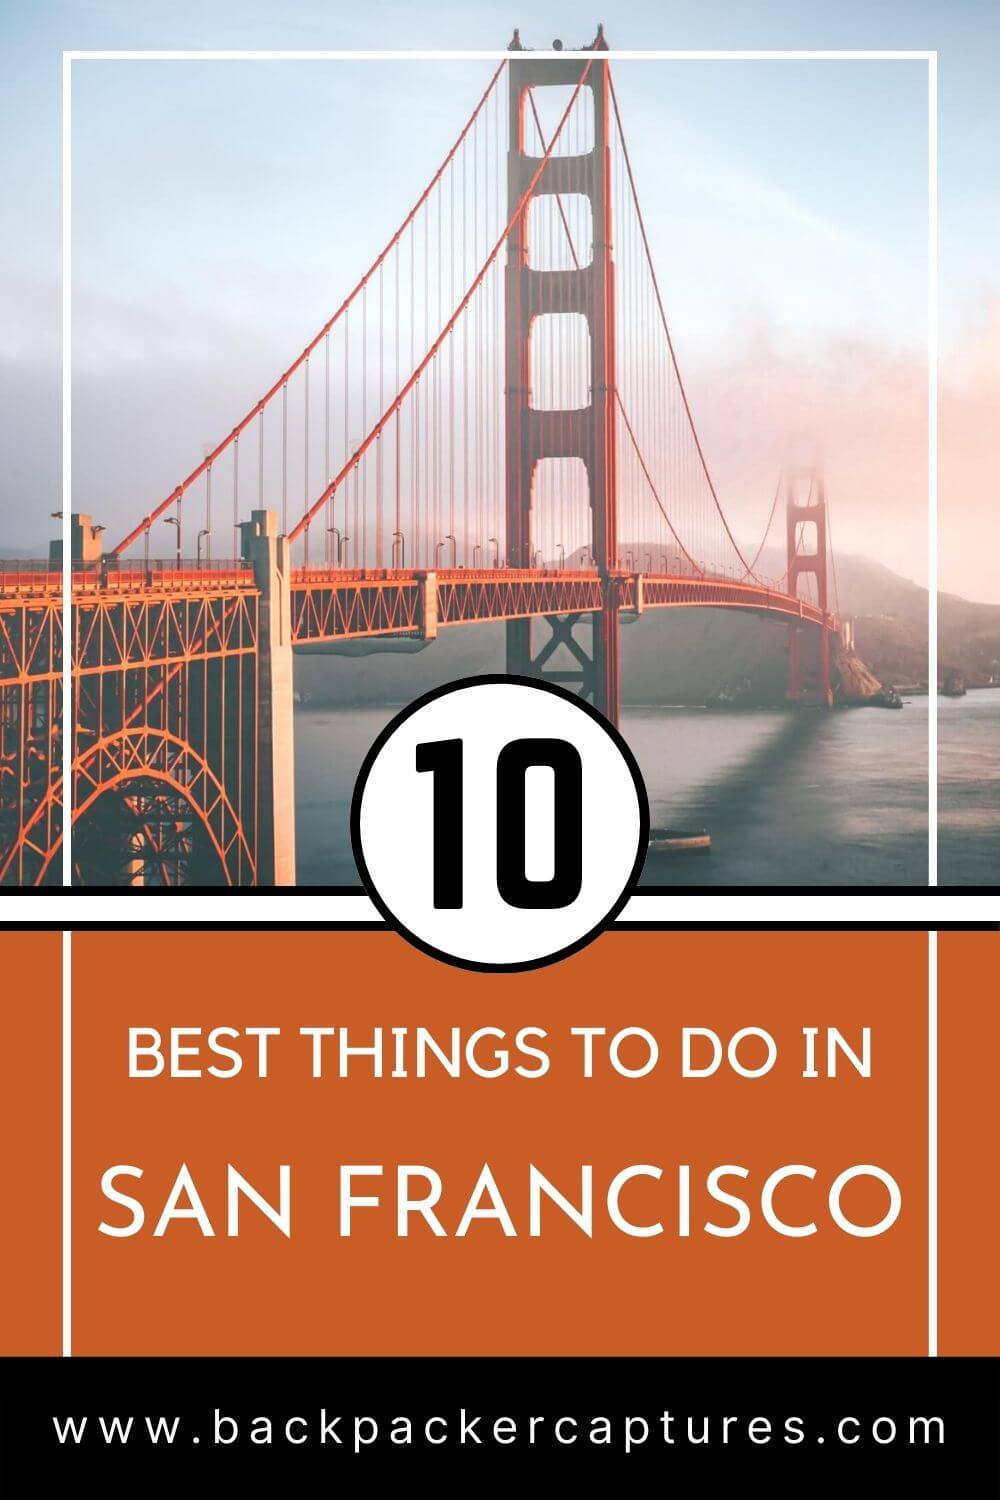 10 Best Things to Do in San Francisco